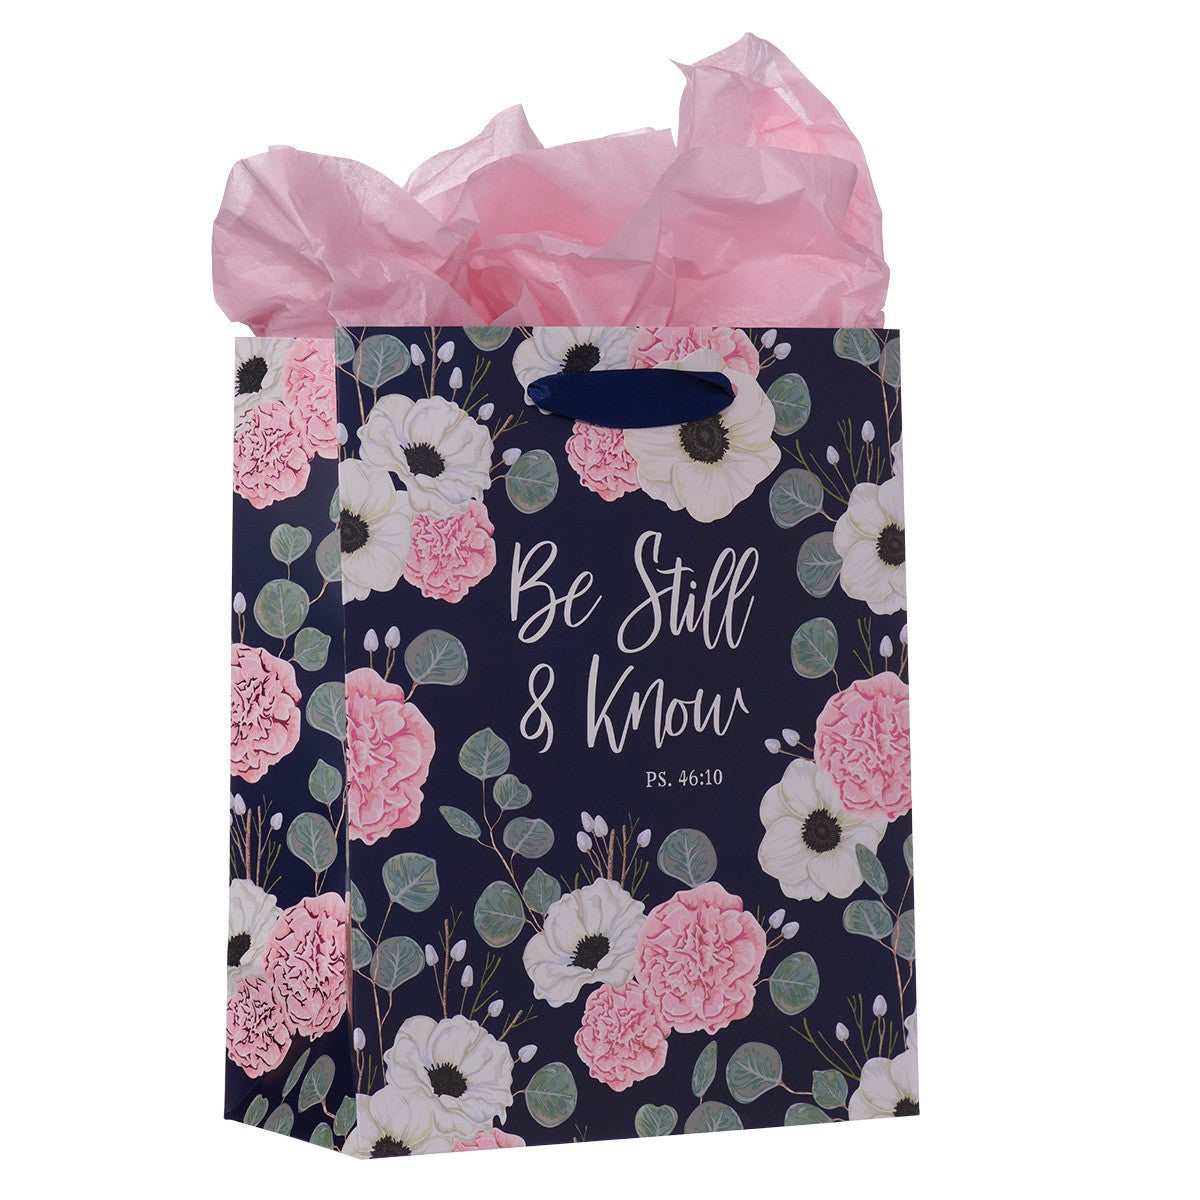 Be Still & Know Medium Gift Bag with Tissue - I AM INTENTIONAL 